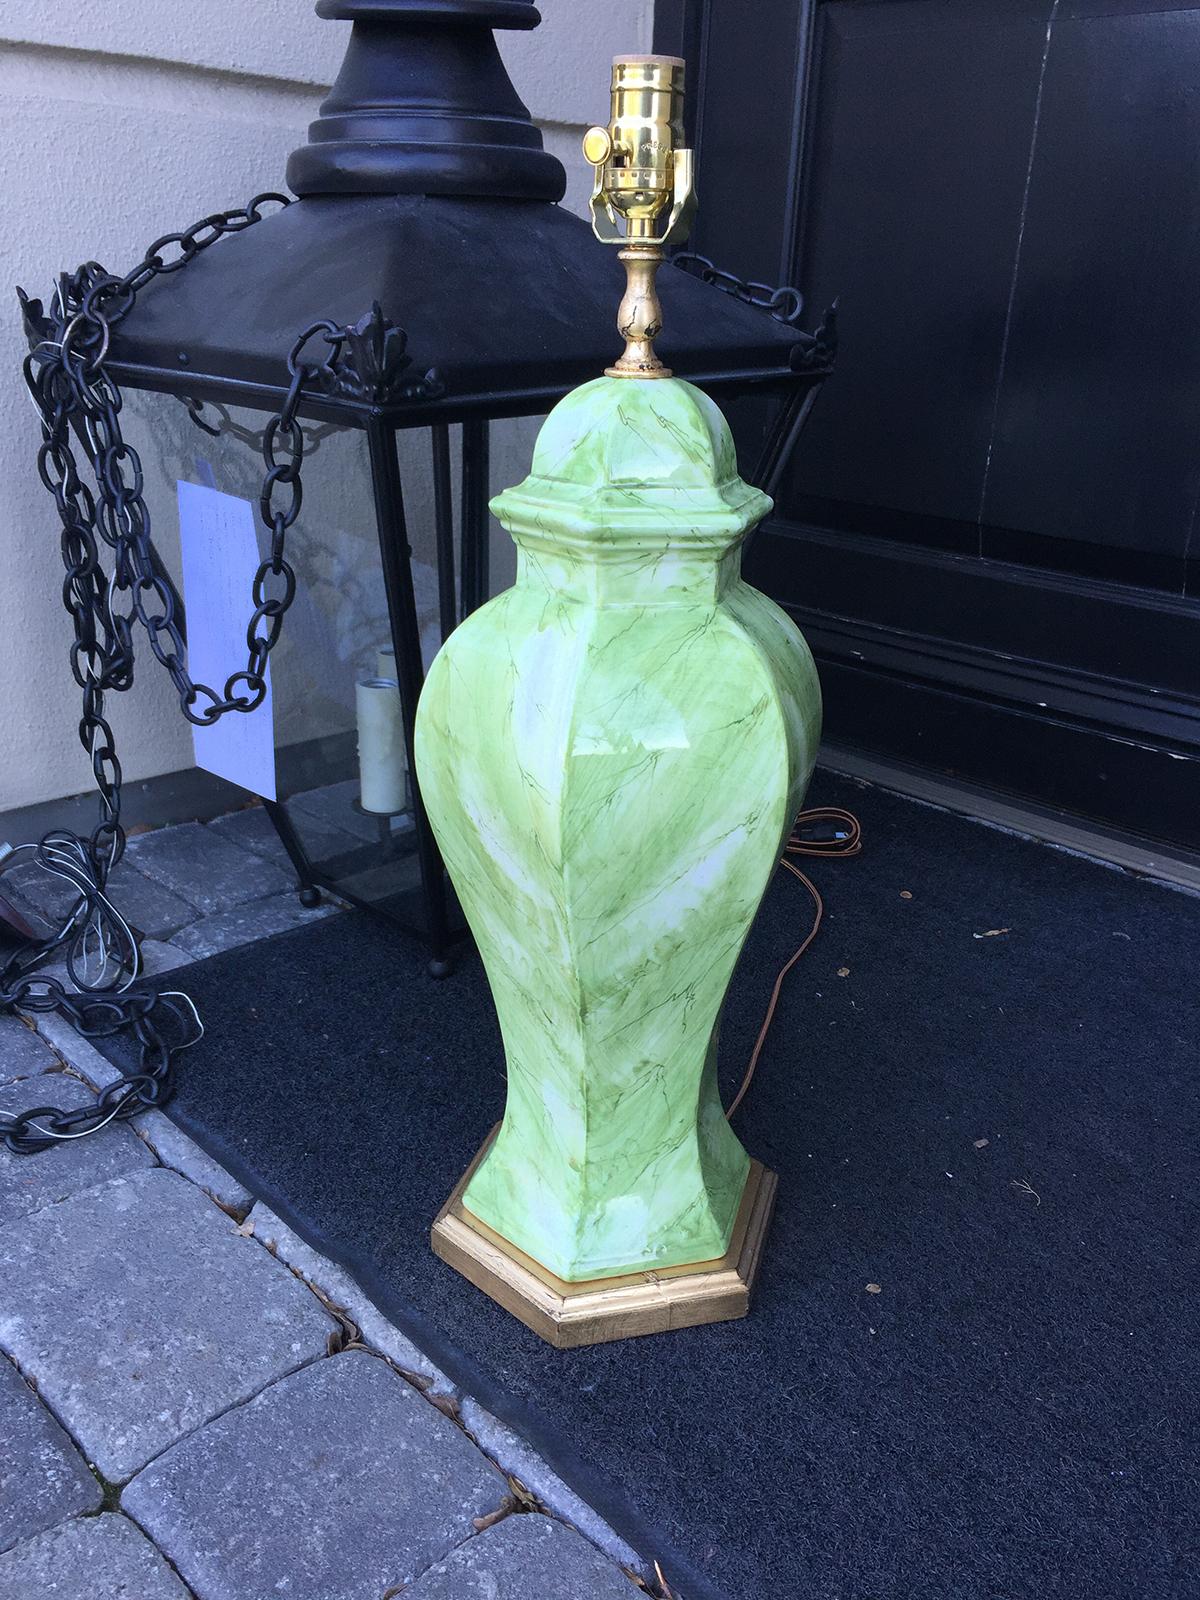 Plaster Mid-20th Century Italian Green and White Faux Marbre Lamp on Custom Base, Marked